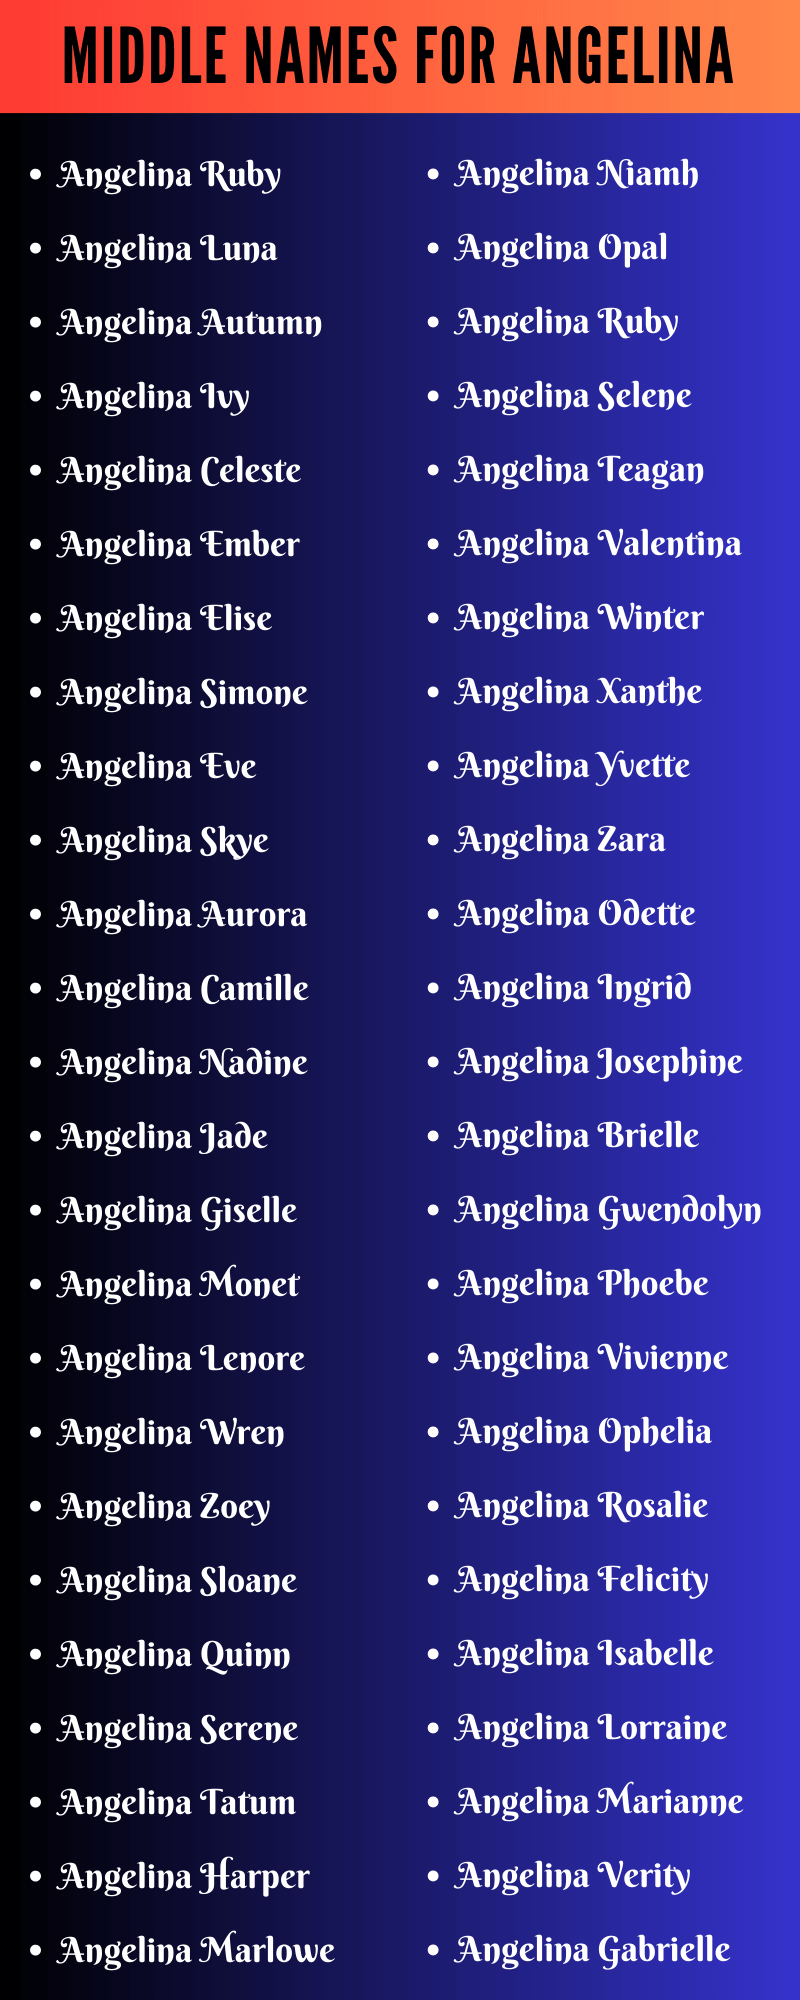 Middle Names For Angelina